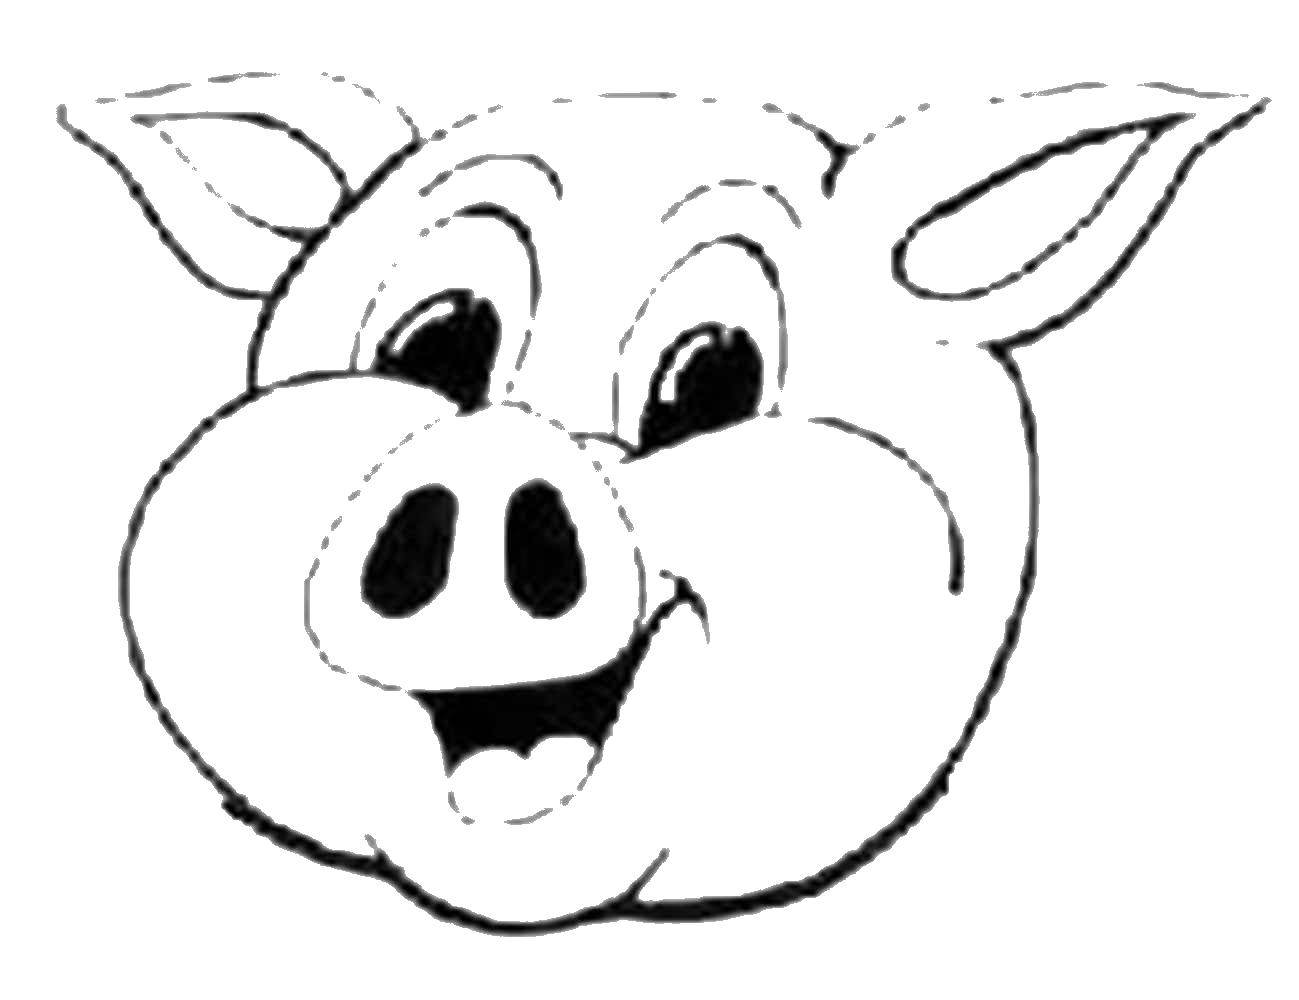 Coloring Pig. Category Masks . Tags:  the pig.